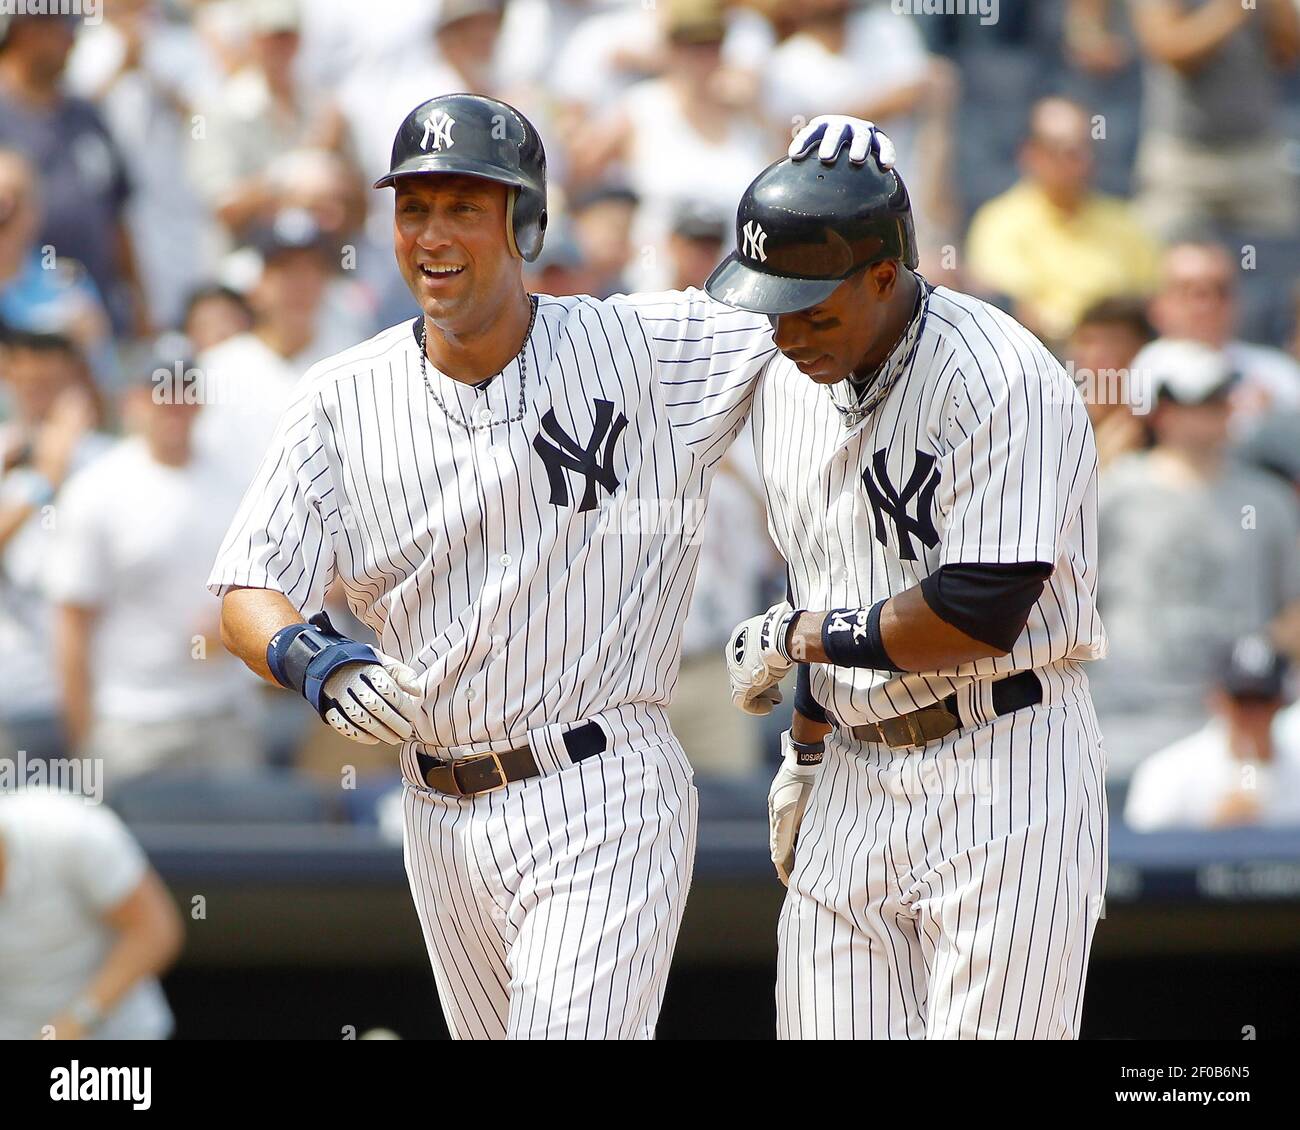 New York Yankees' Derek Jeter congratulates Curtis Granderson on his  two-run homer against the Oakland Athletics' in the fifth inning at Yankee  Stadium in New York, Sunday, July 24, 2011. (Photo by